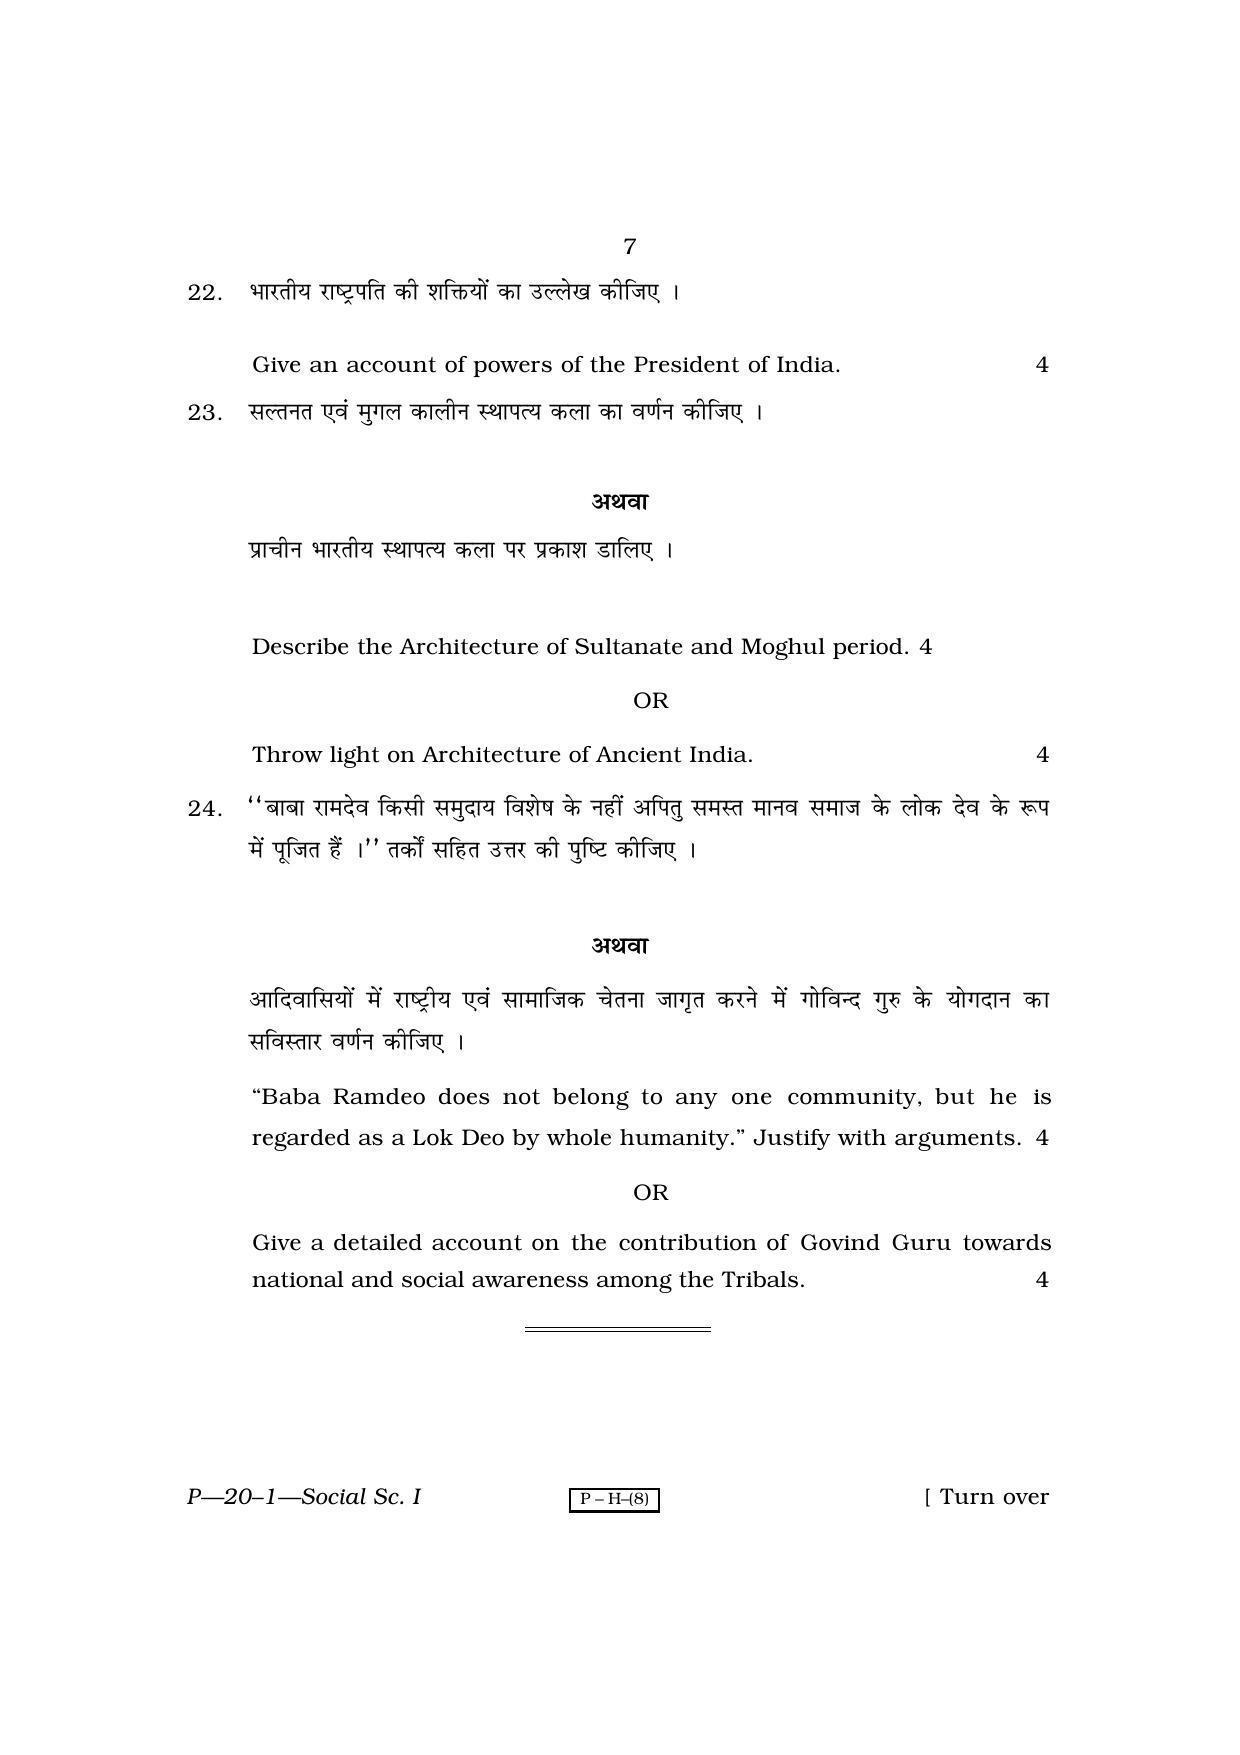 RBSE 2010 Social Science I Praveshika Question Paper - Page 7